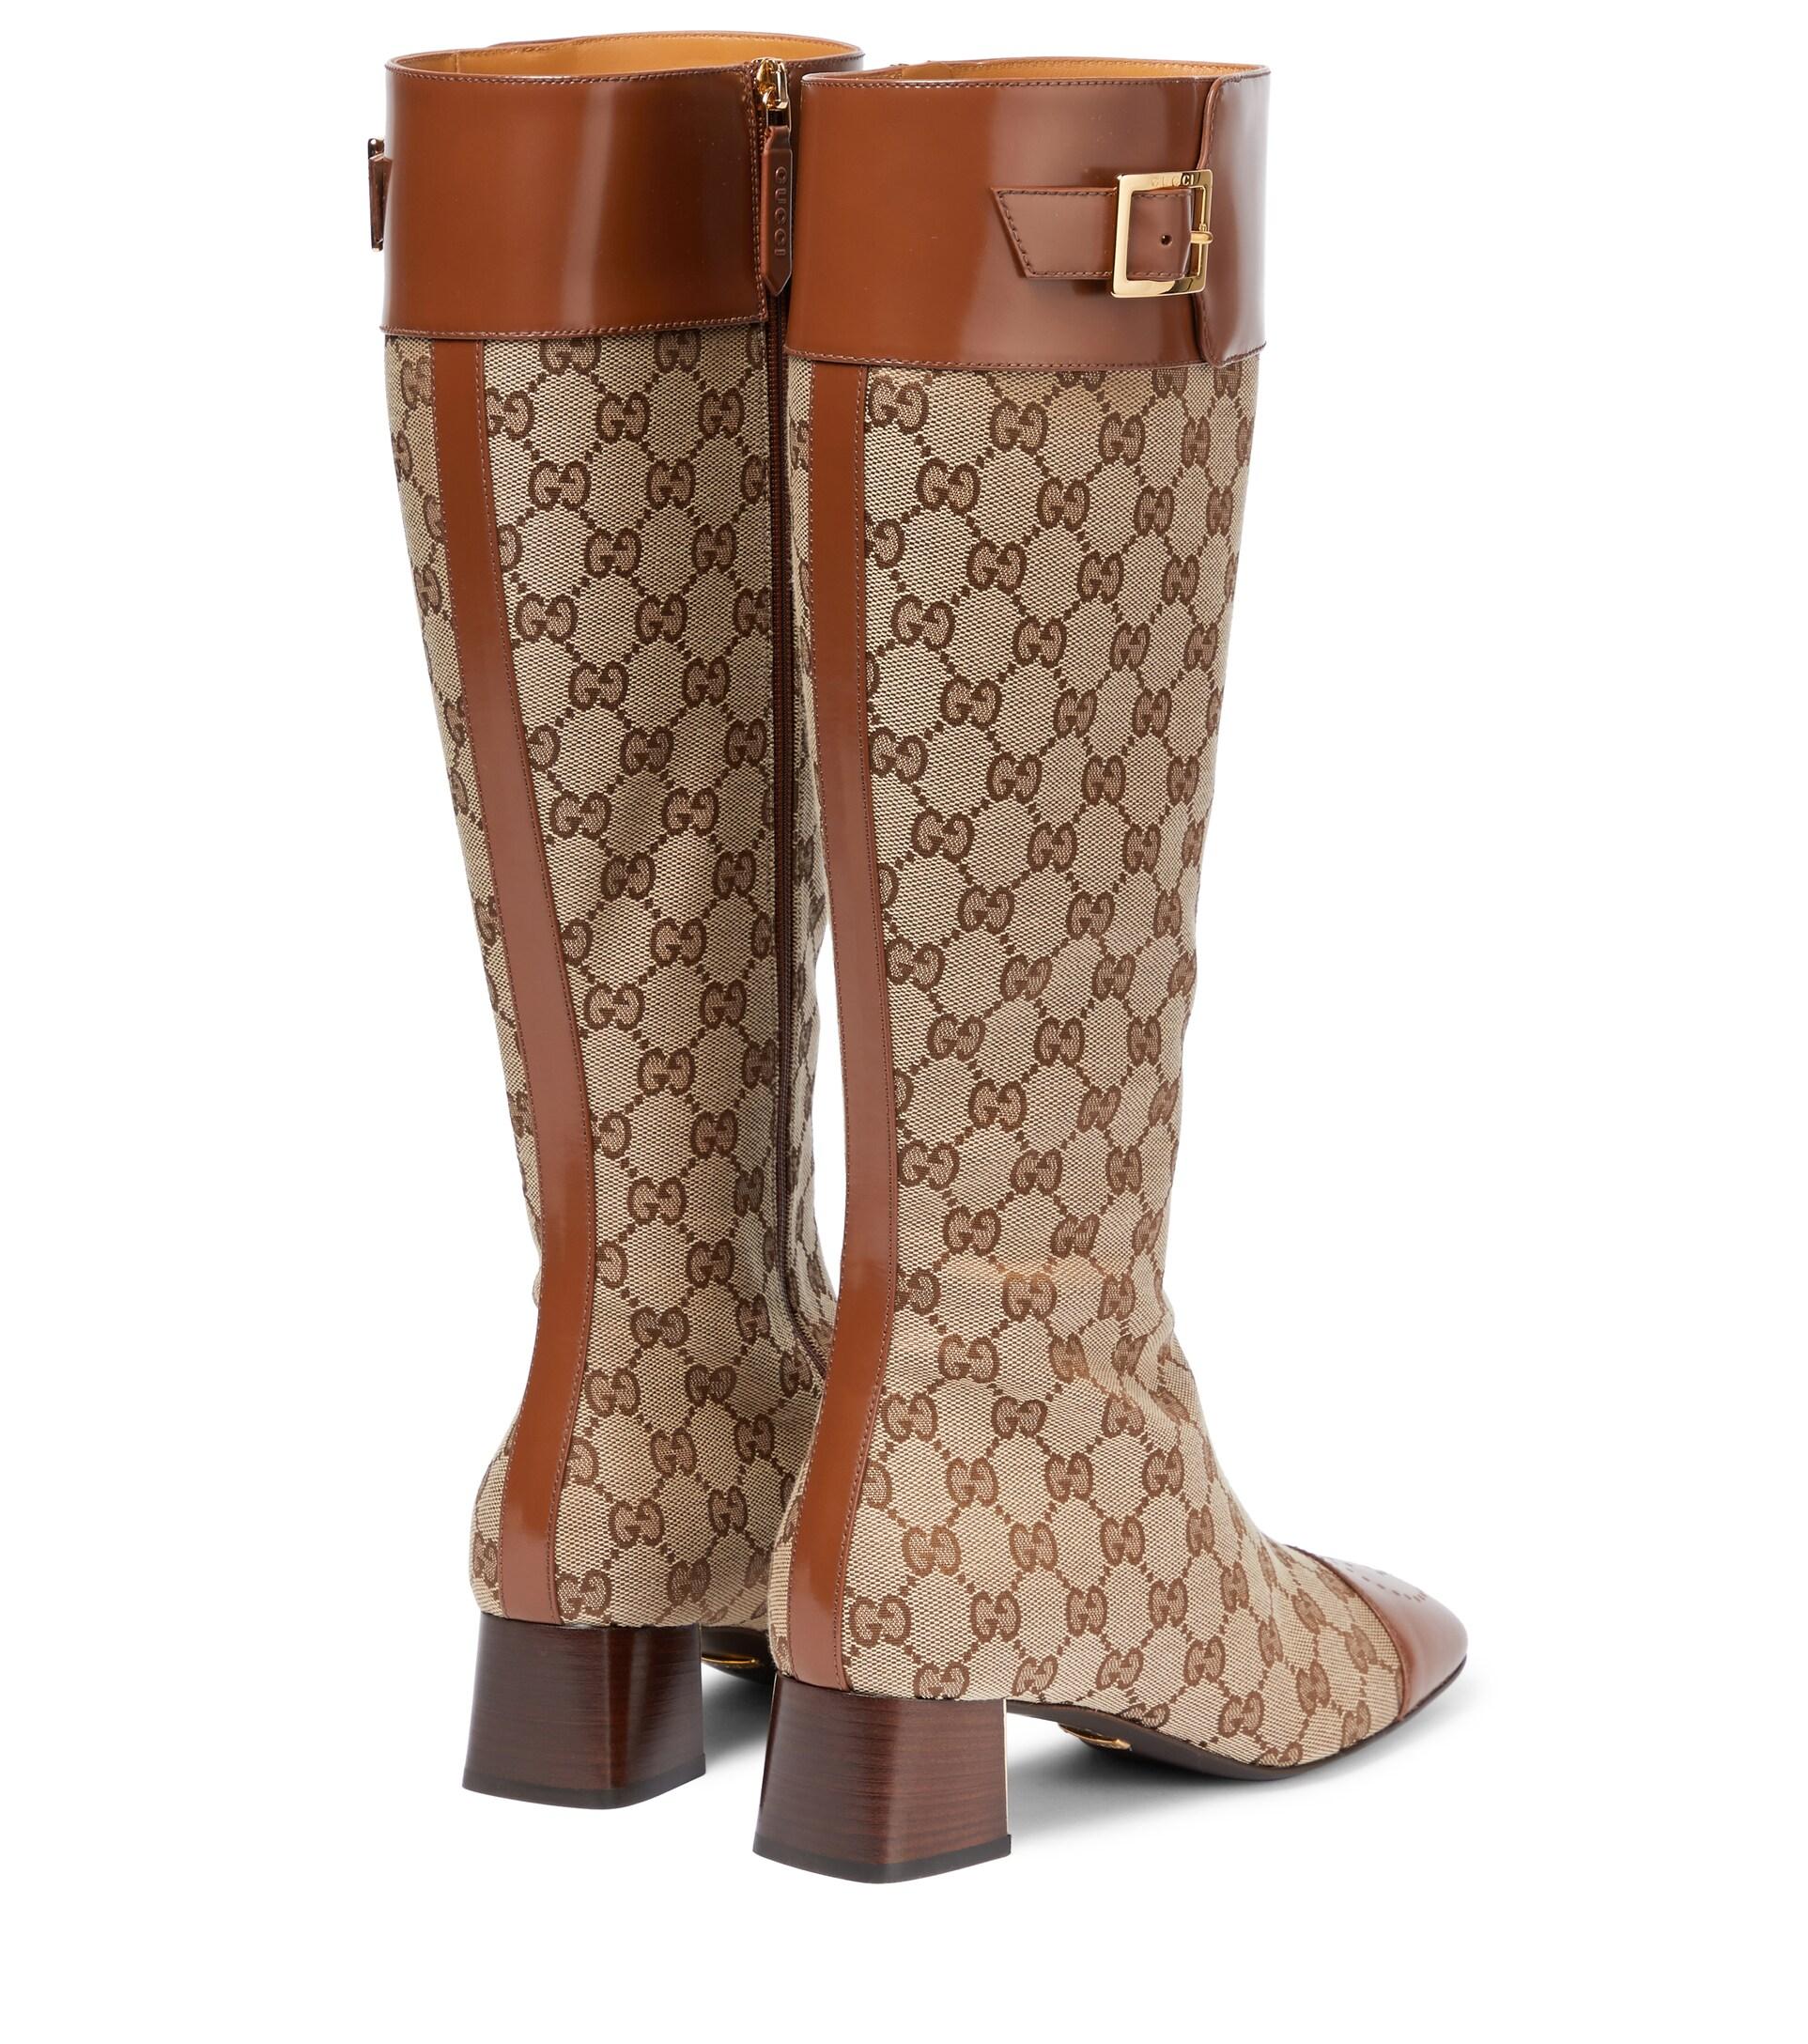 Gucci Canvas GG Supreme Leather-trimmed Knee-high Boots in Brown | Lyst